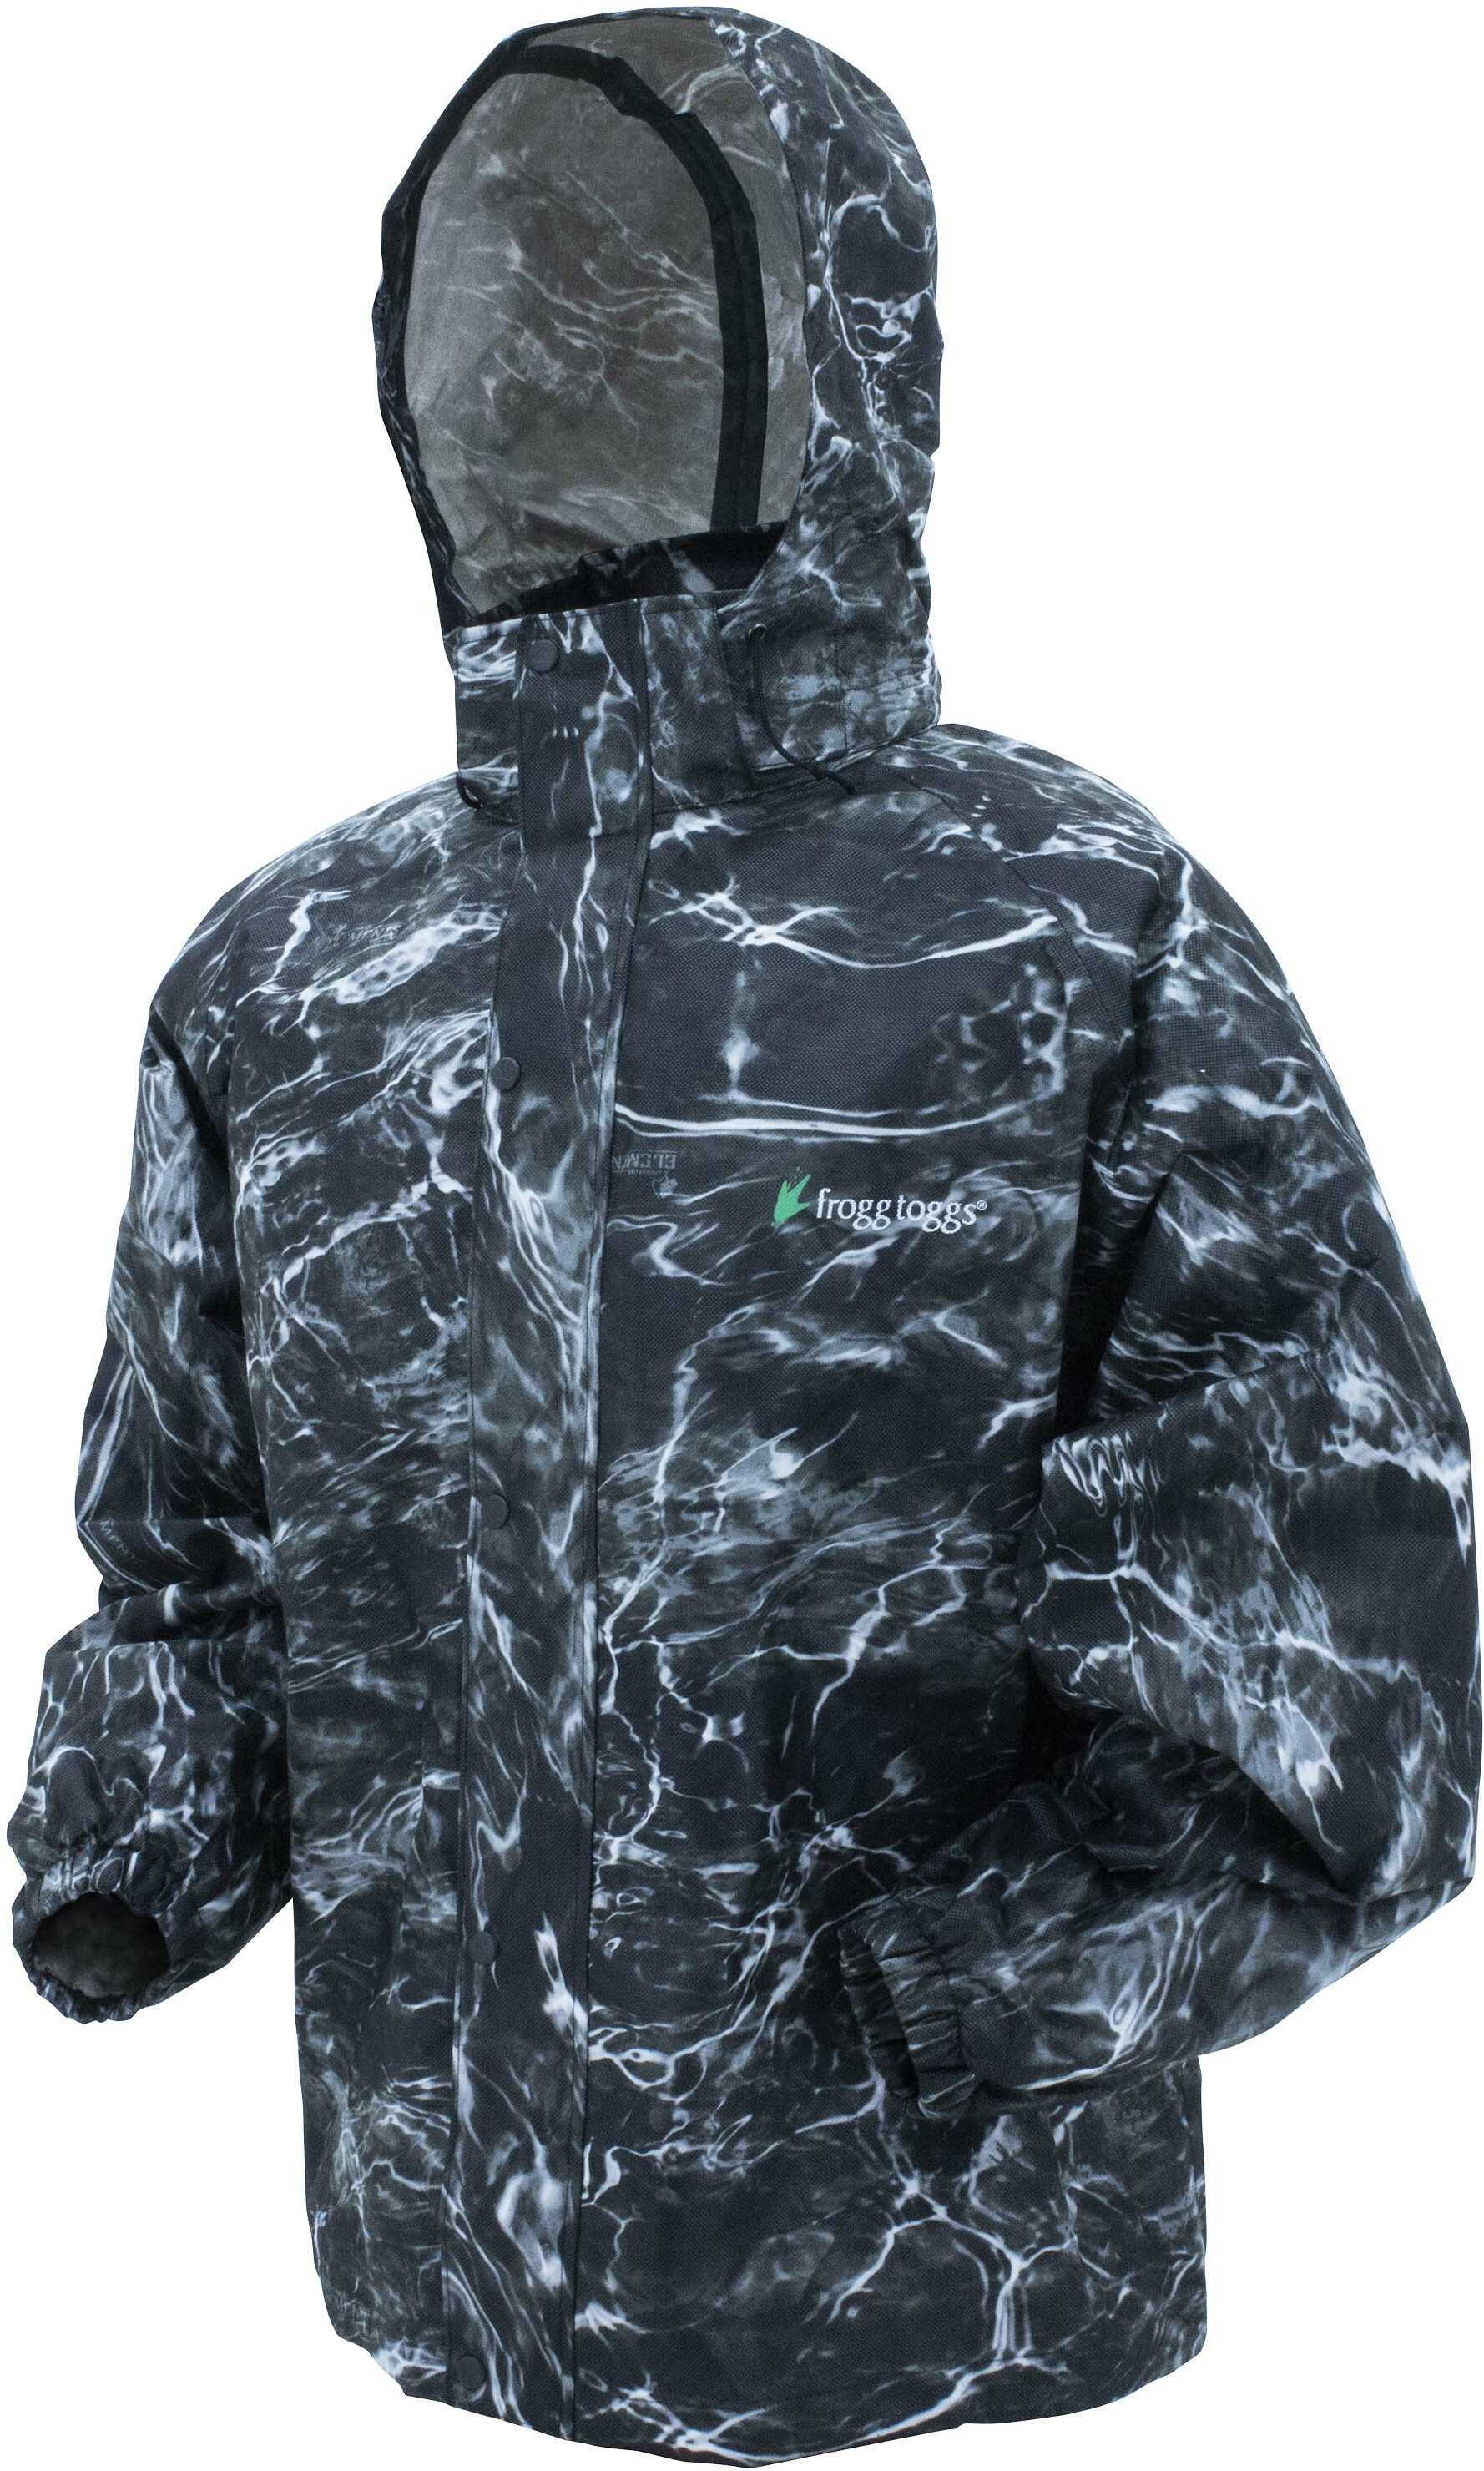 Frogg Toggs All Purpose Jacket Mossy Oak Element Blacktip, Large